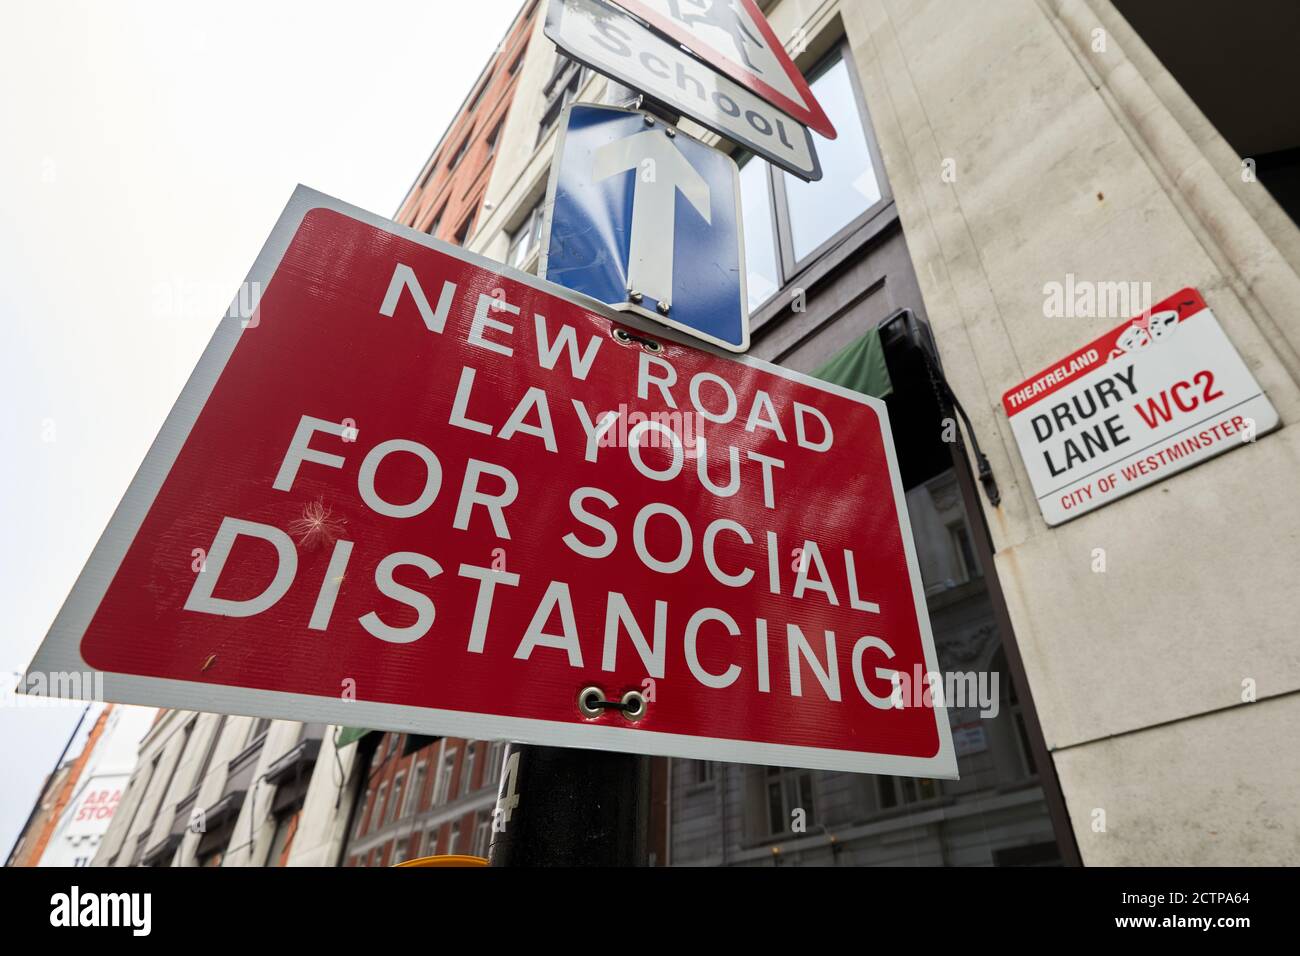 London, UK. - 21 Sept 2020: A street sign in Drury Lane warns drivers of new layout measures to help social distancing in the wake of the coronavirus pandemic. Stock Photo